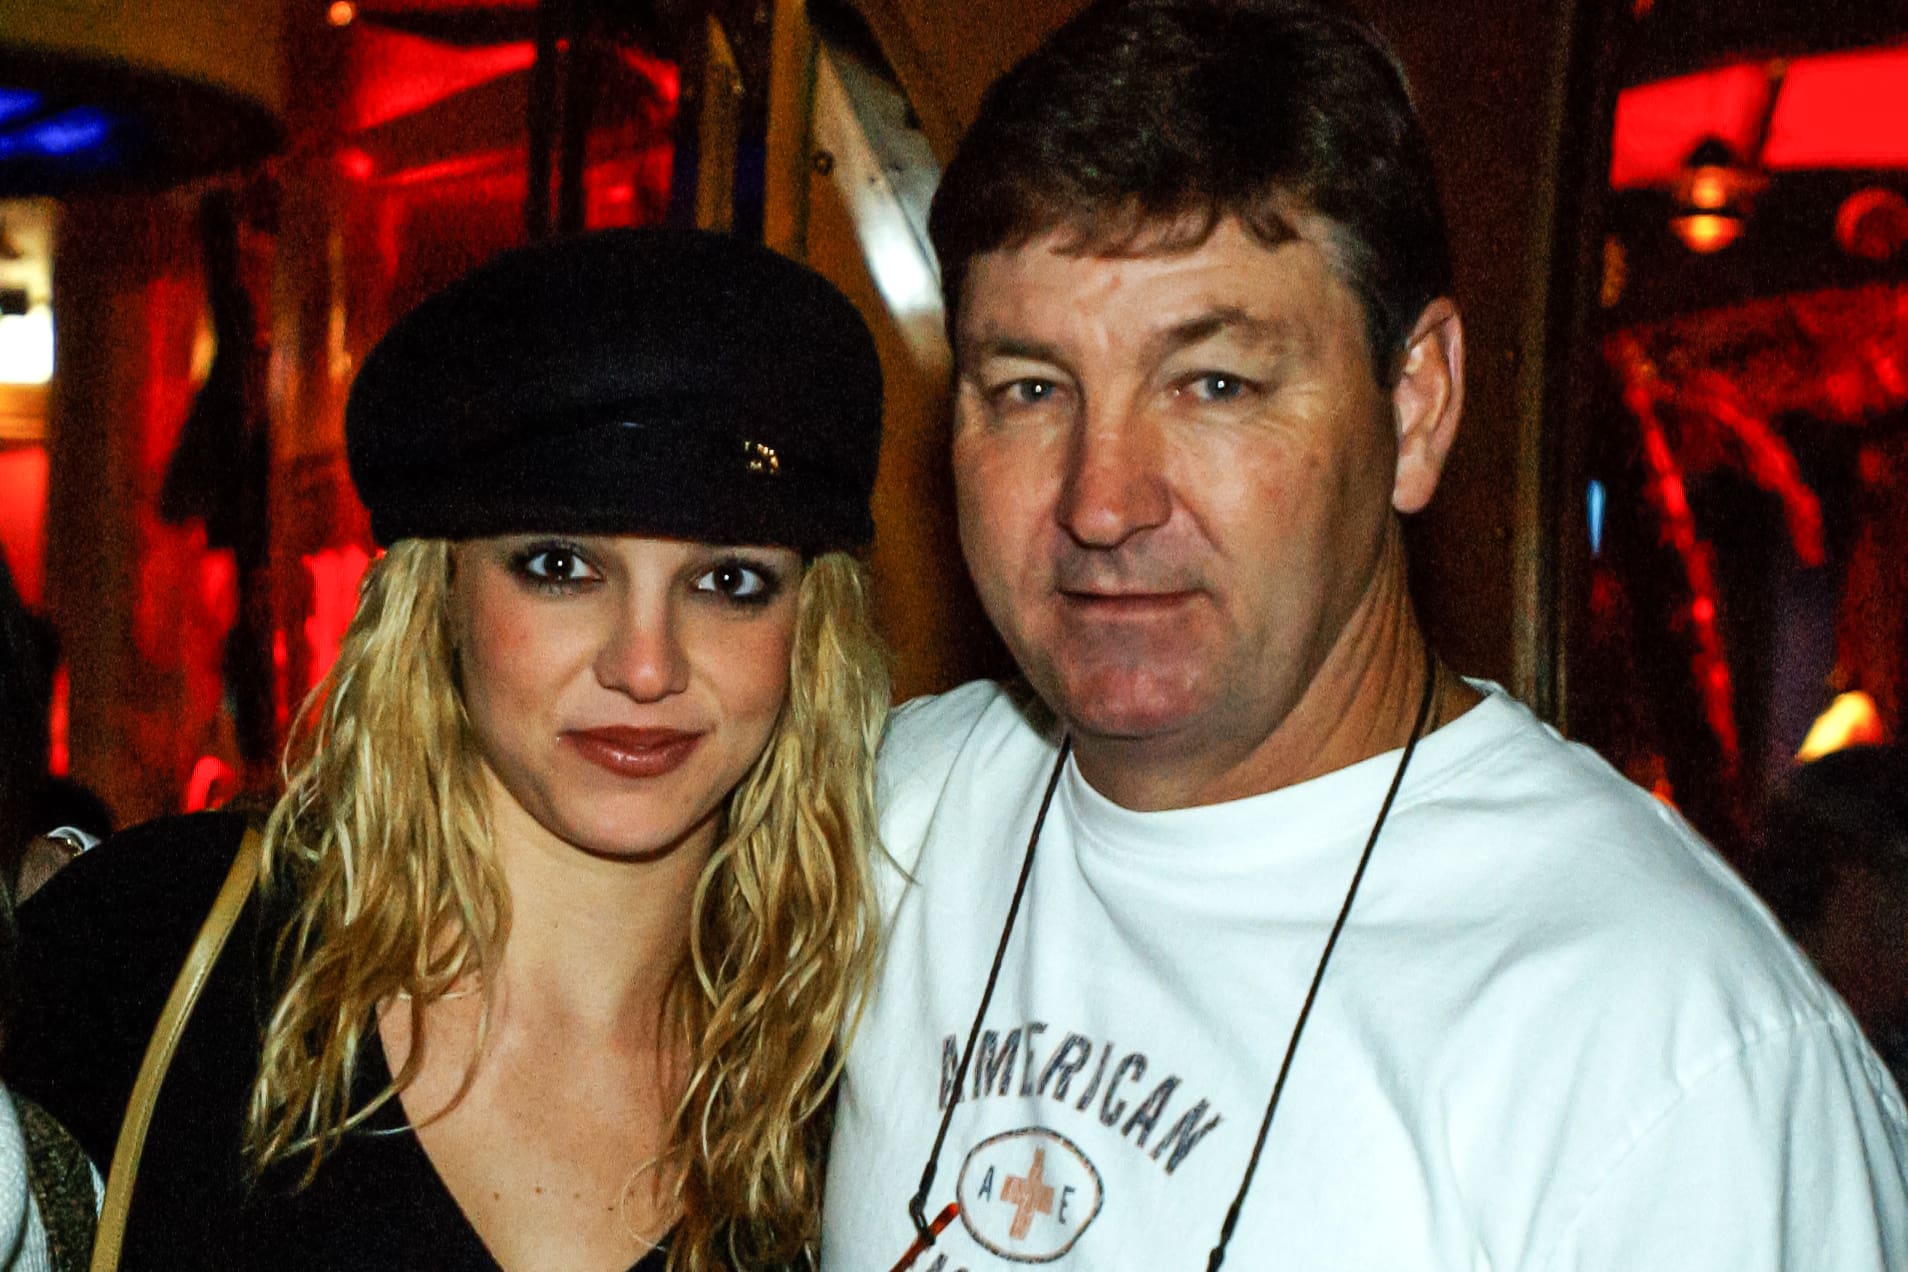 jamie-spears-father-of-britney-spears-denies-bugging-her-bedroom-during-conservatorship